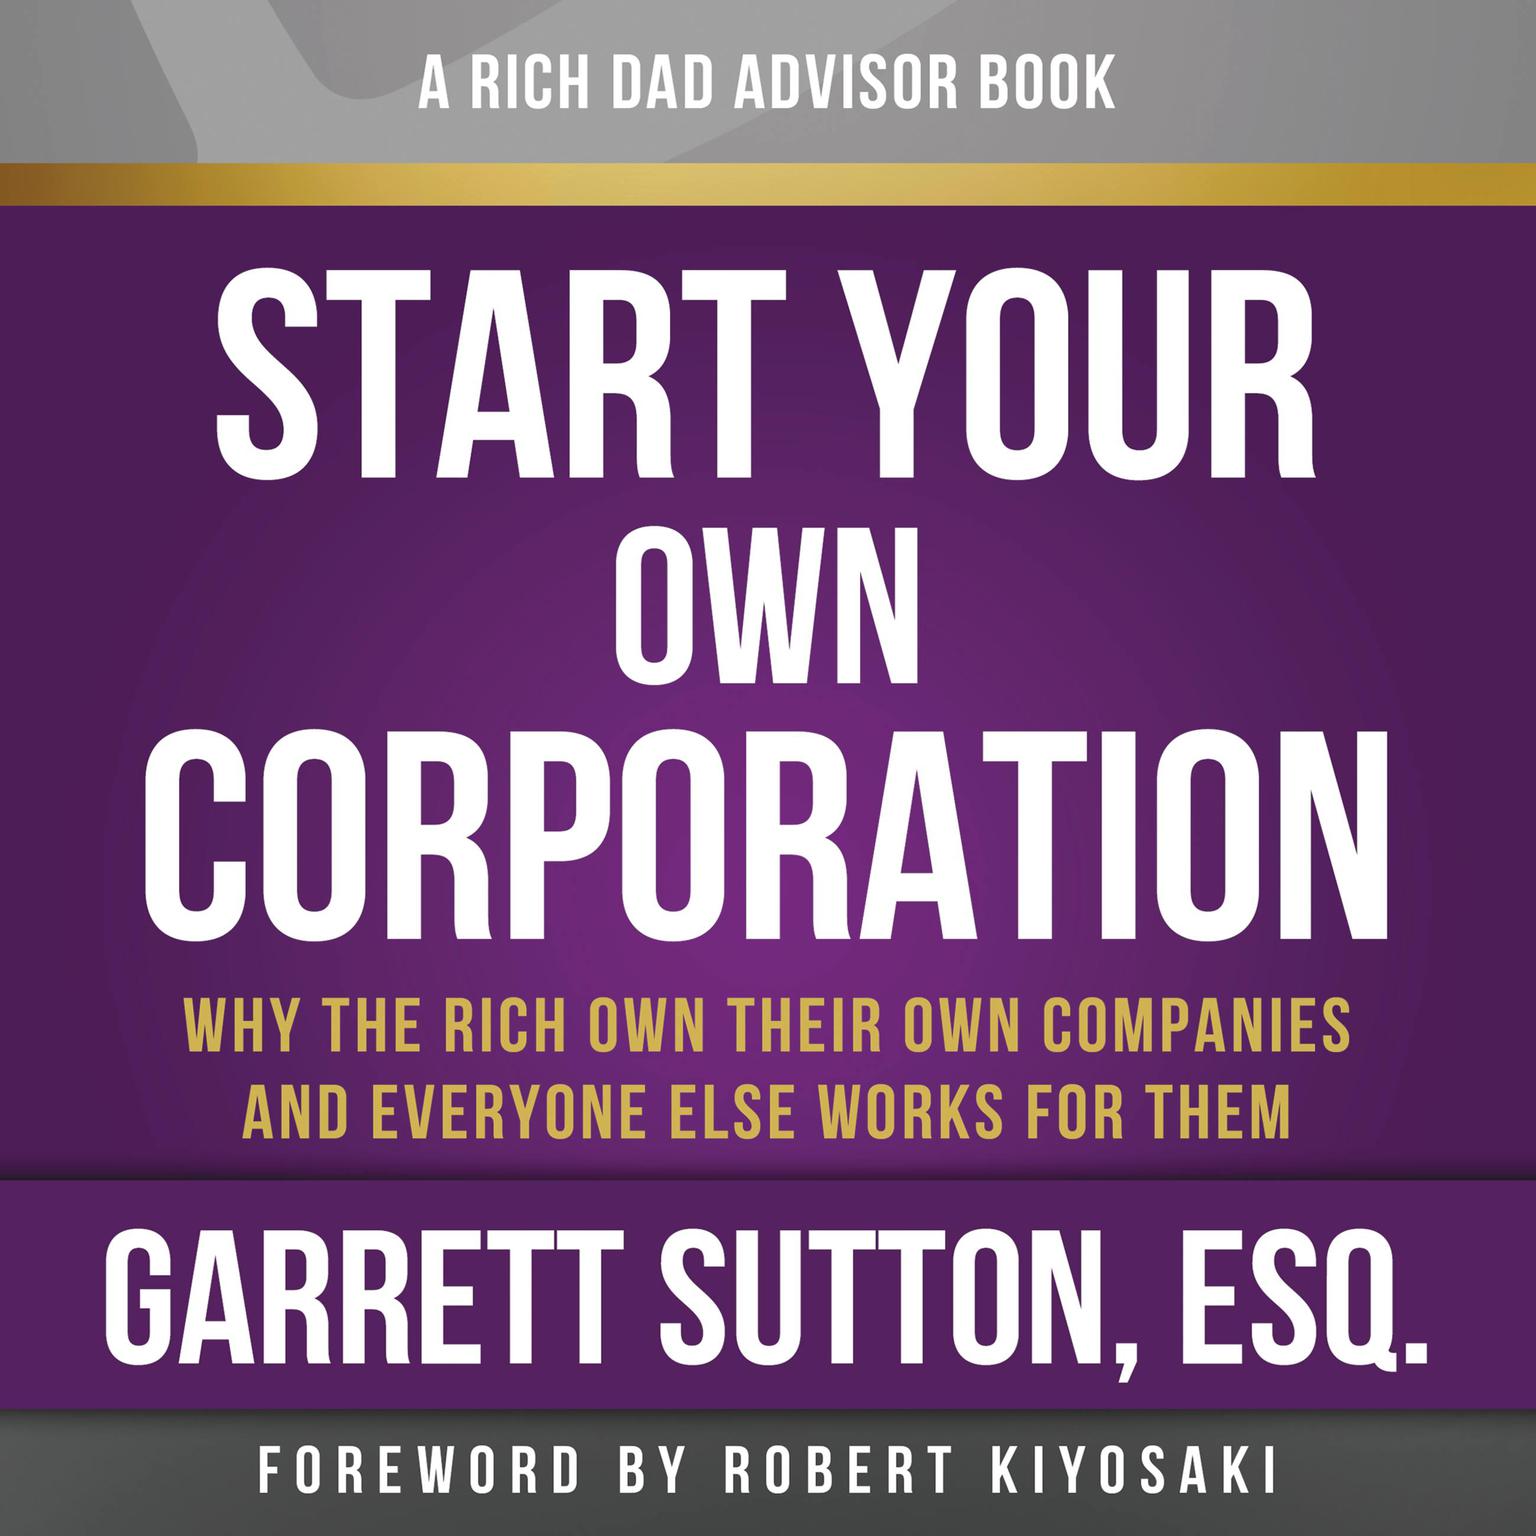 Start Your Own Corporation, 3rd Edition: Why the Rich Own Their Own Companies and Everyone Else Works for Them Audiobook, by Garrett Sutton